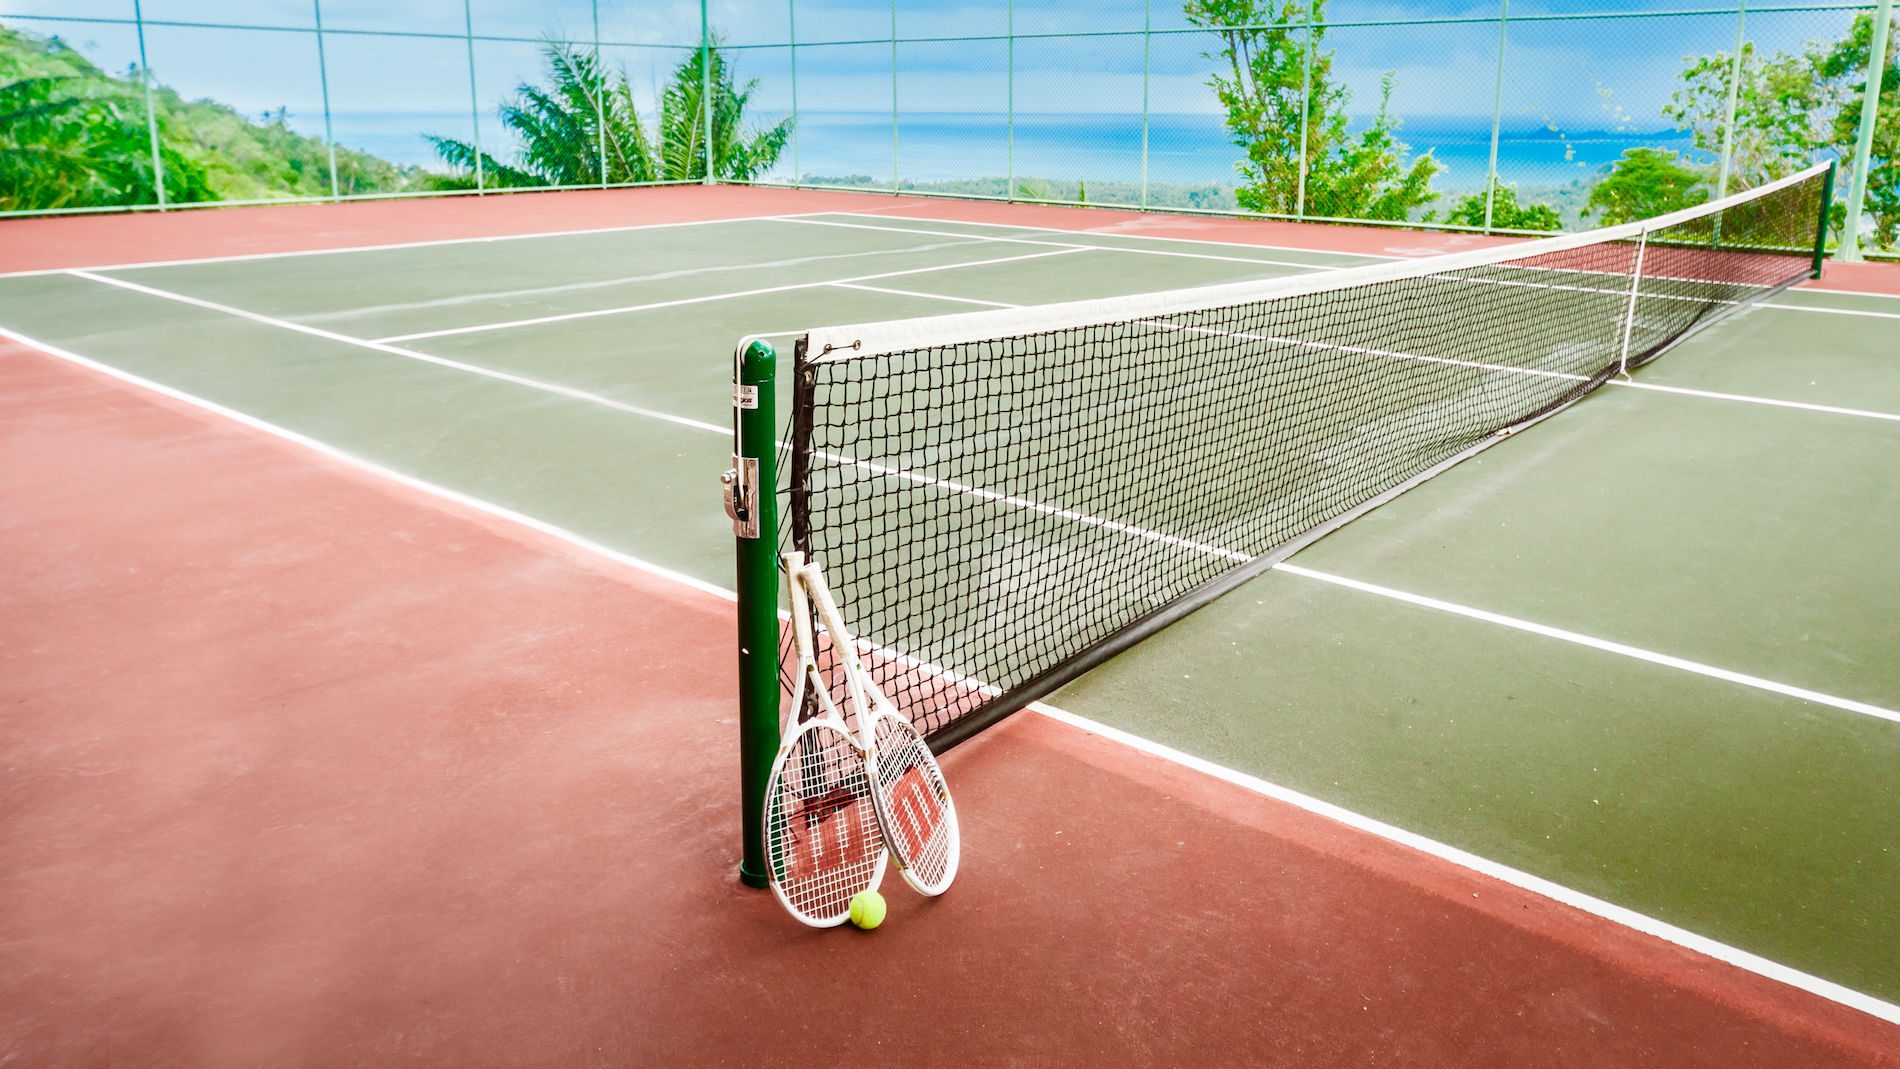 Estimating The Cost Of Resurfacing The Tennis Court